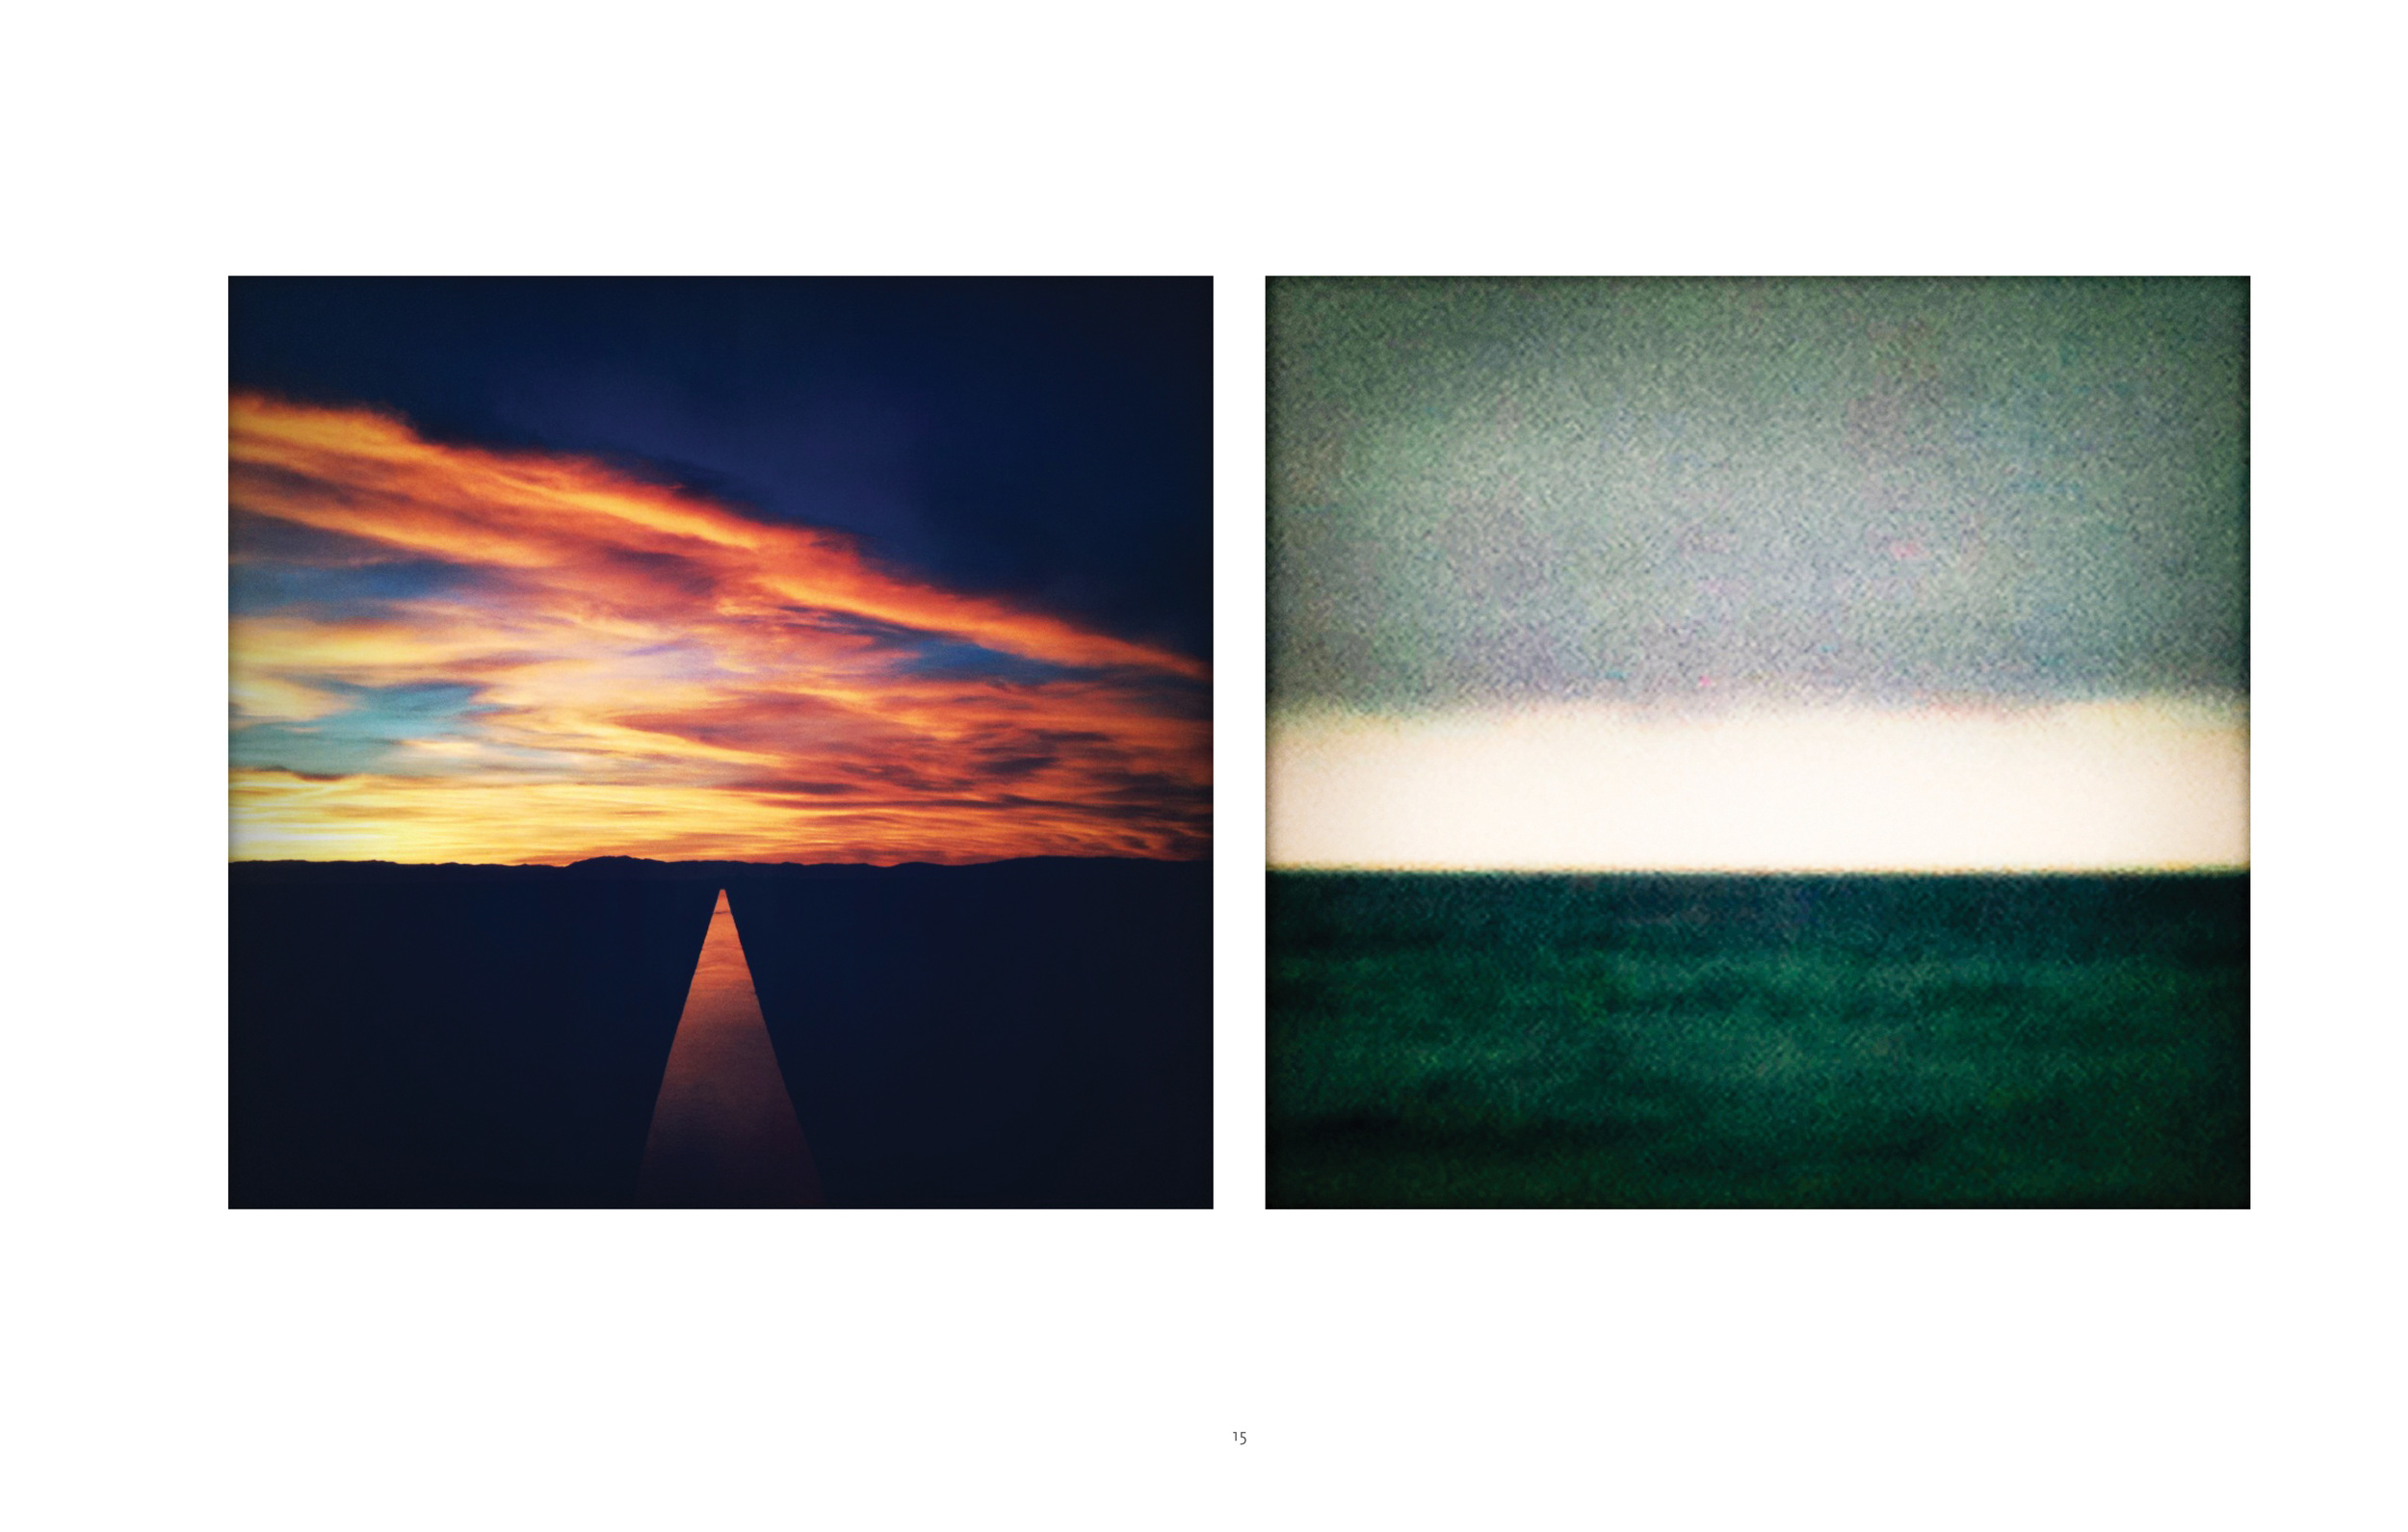  Selected Images from "Postcards Home" - Published by Daylight Books 2013 